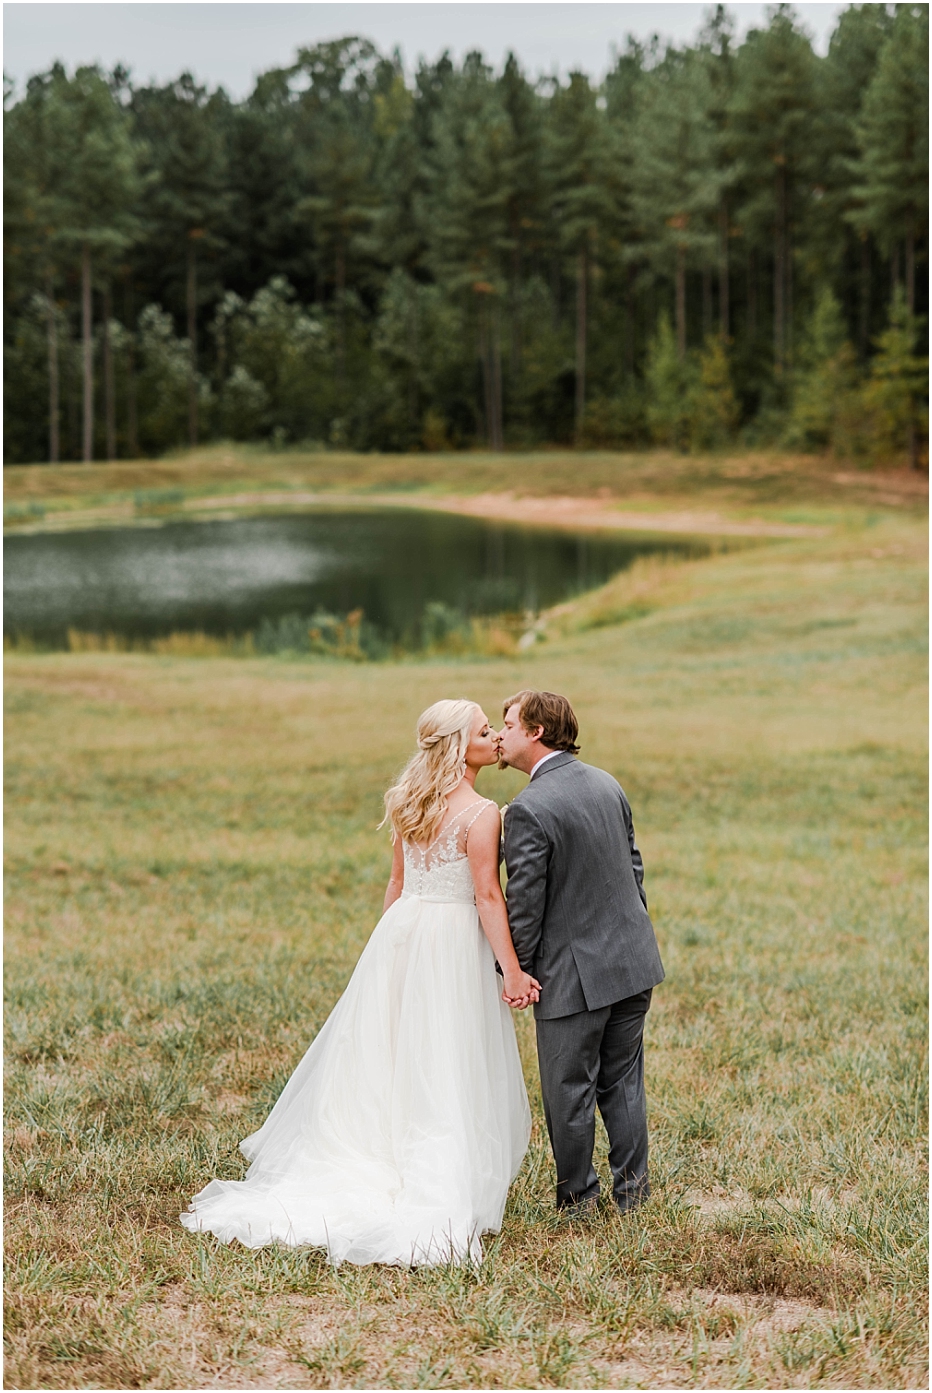 The Barn at Timber Creek Fall Wedding | Welsey + Zack